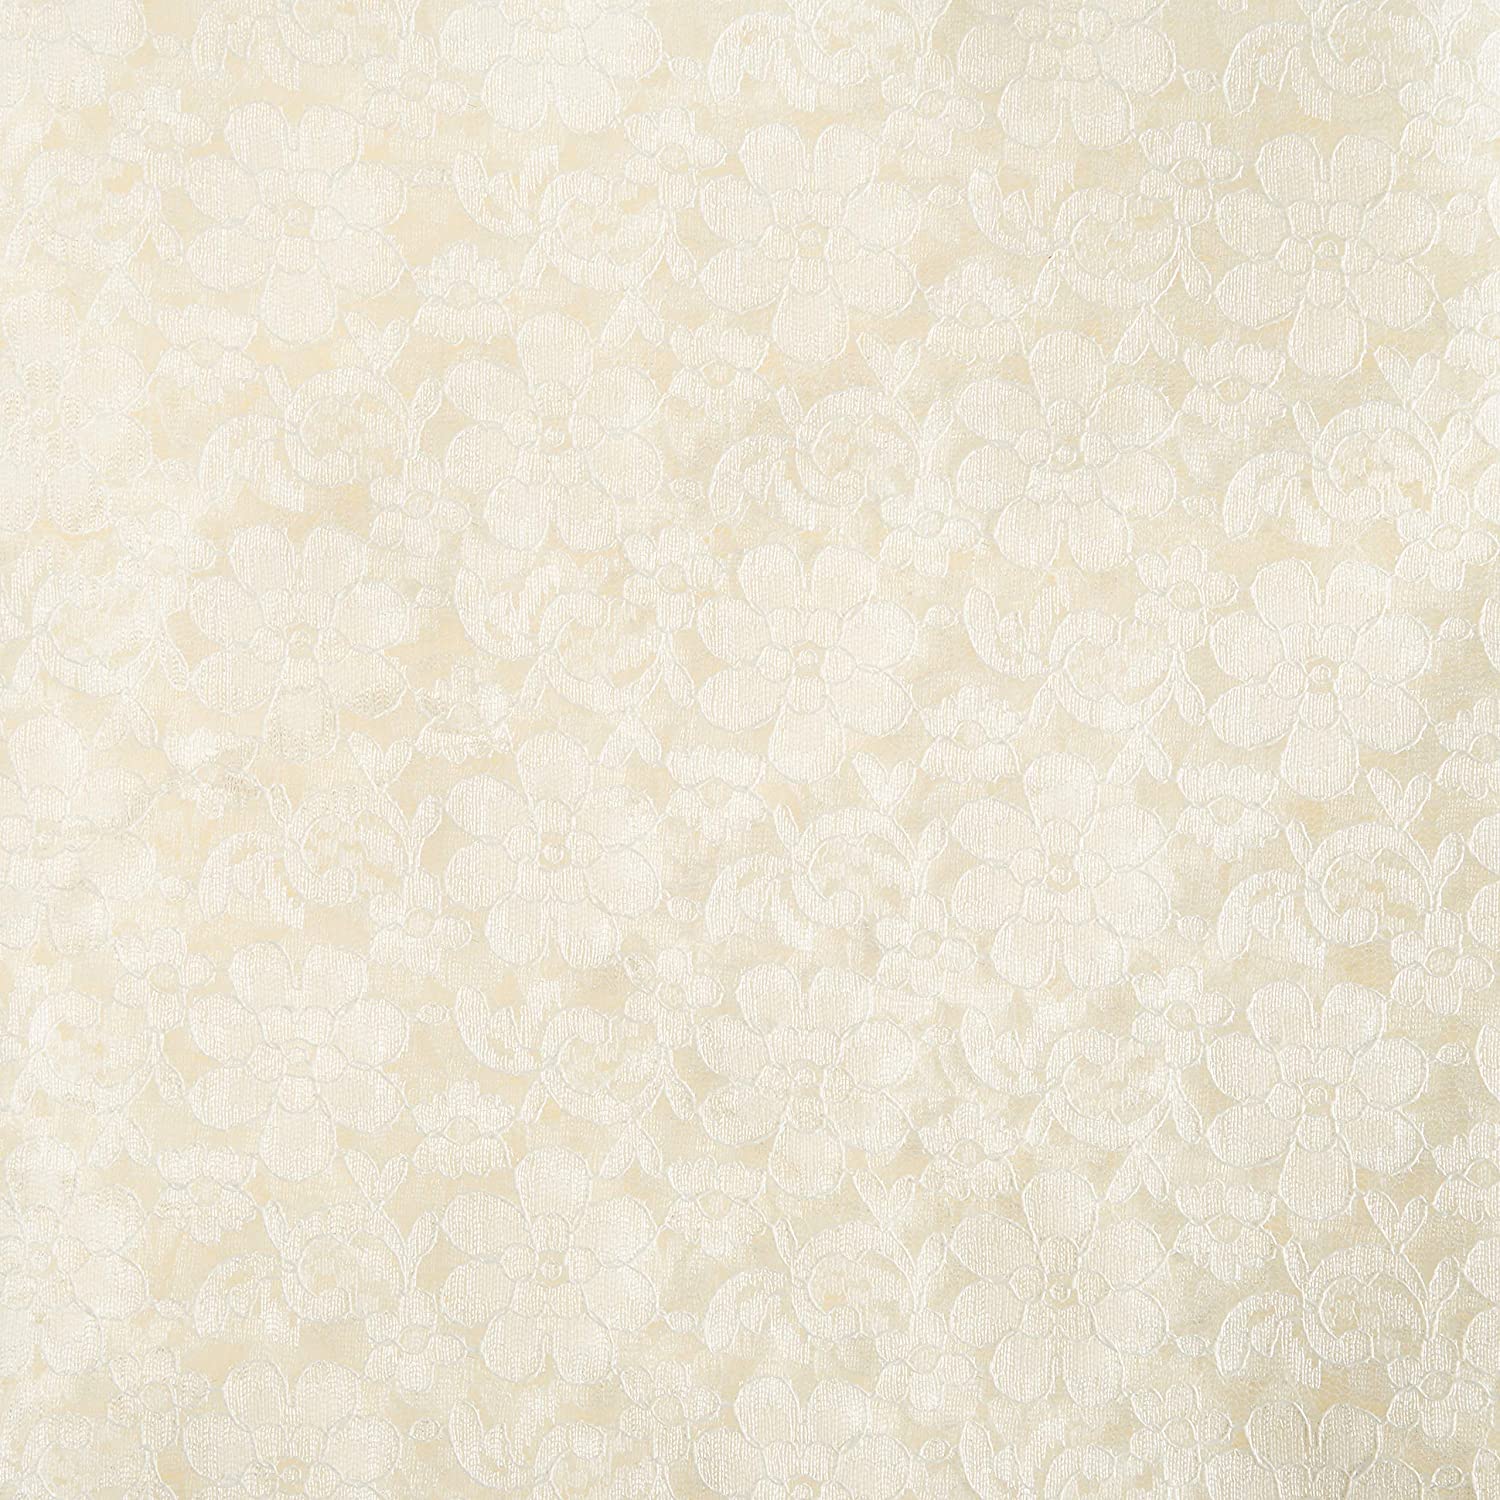 58/60" Ivory Raschel Lace Fabric By The Yard